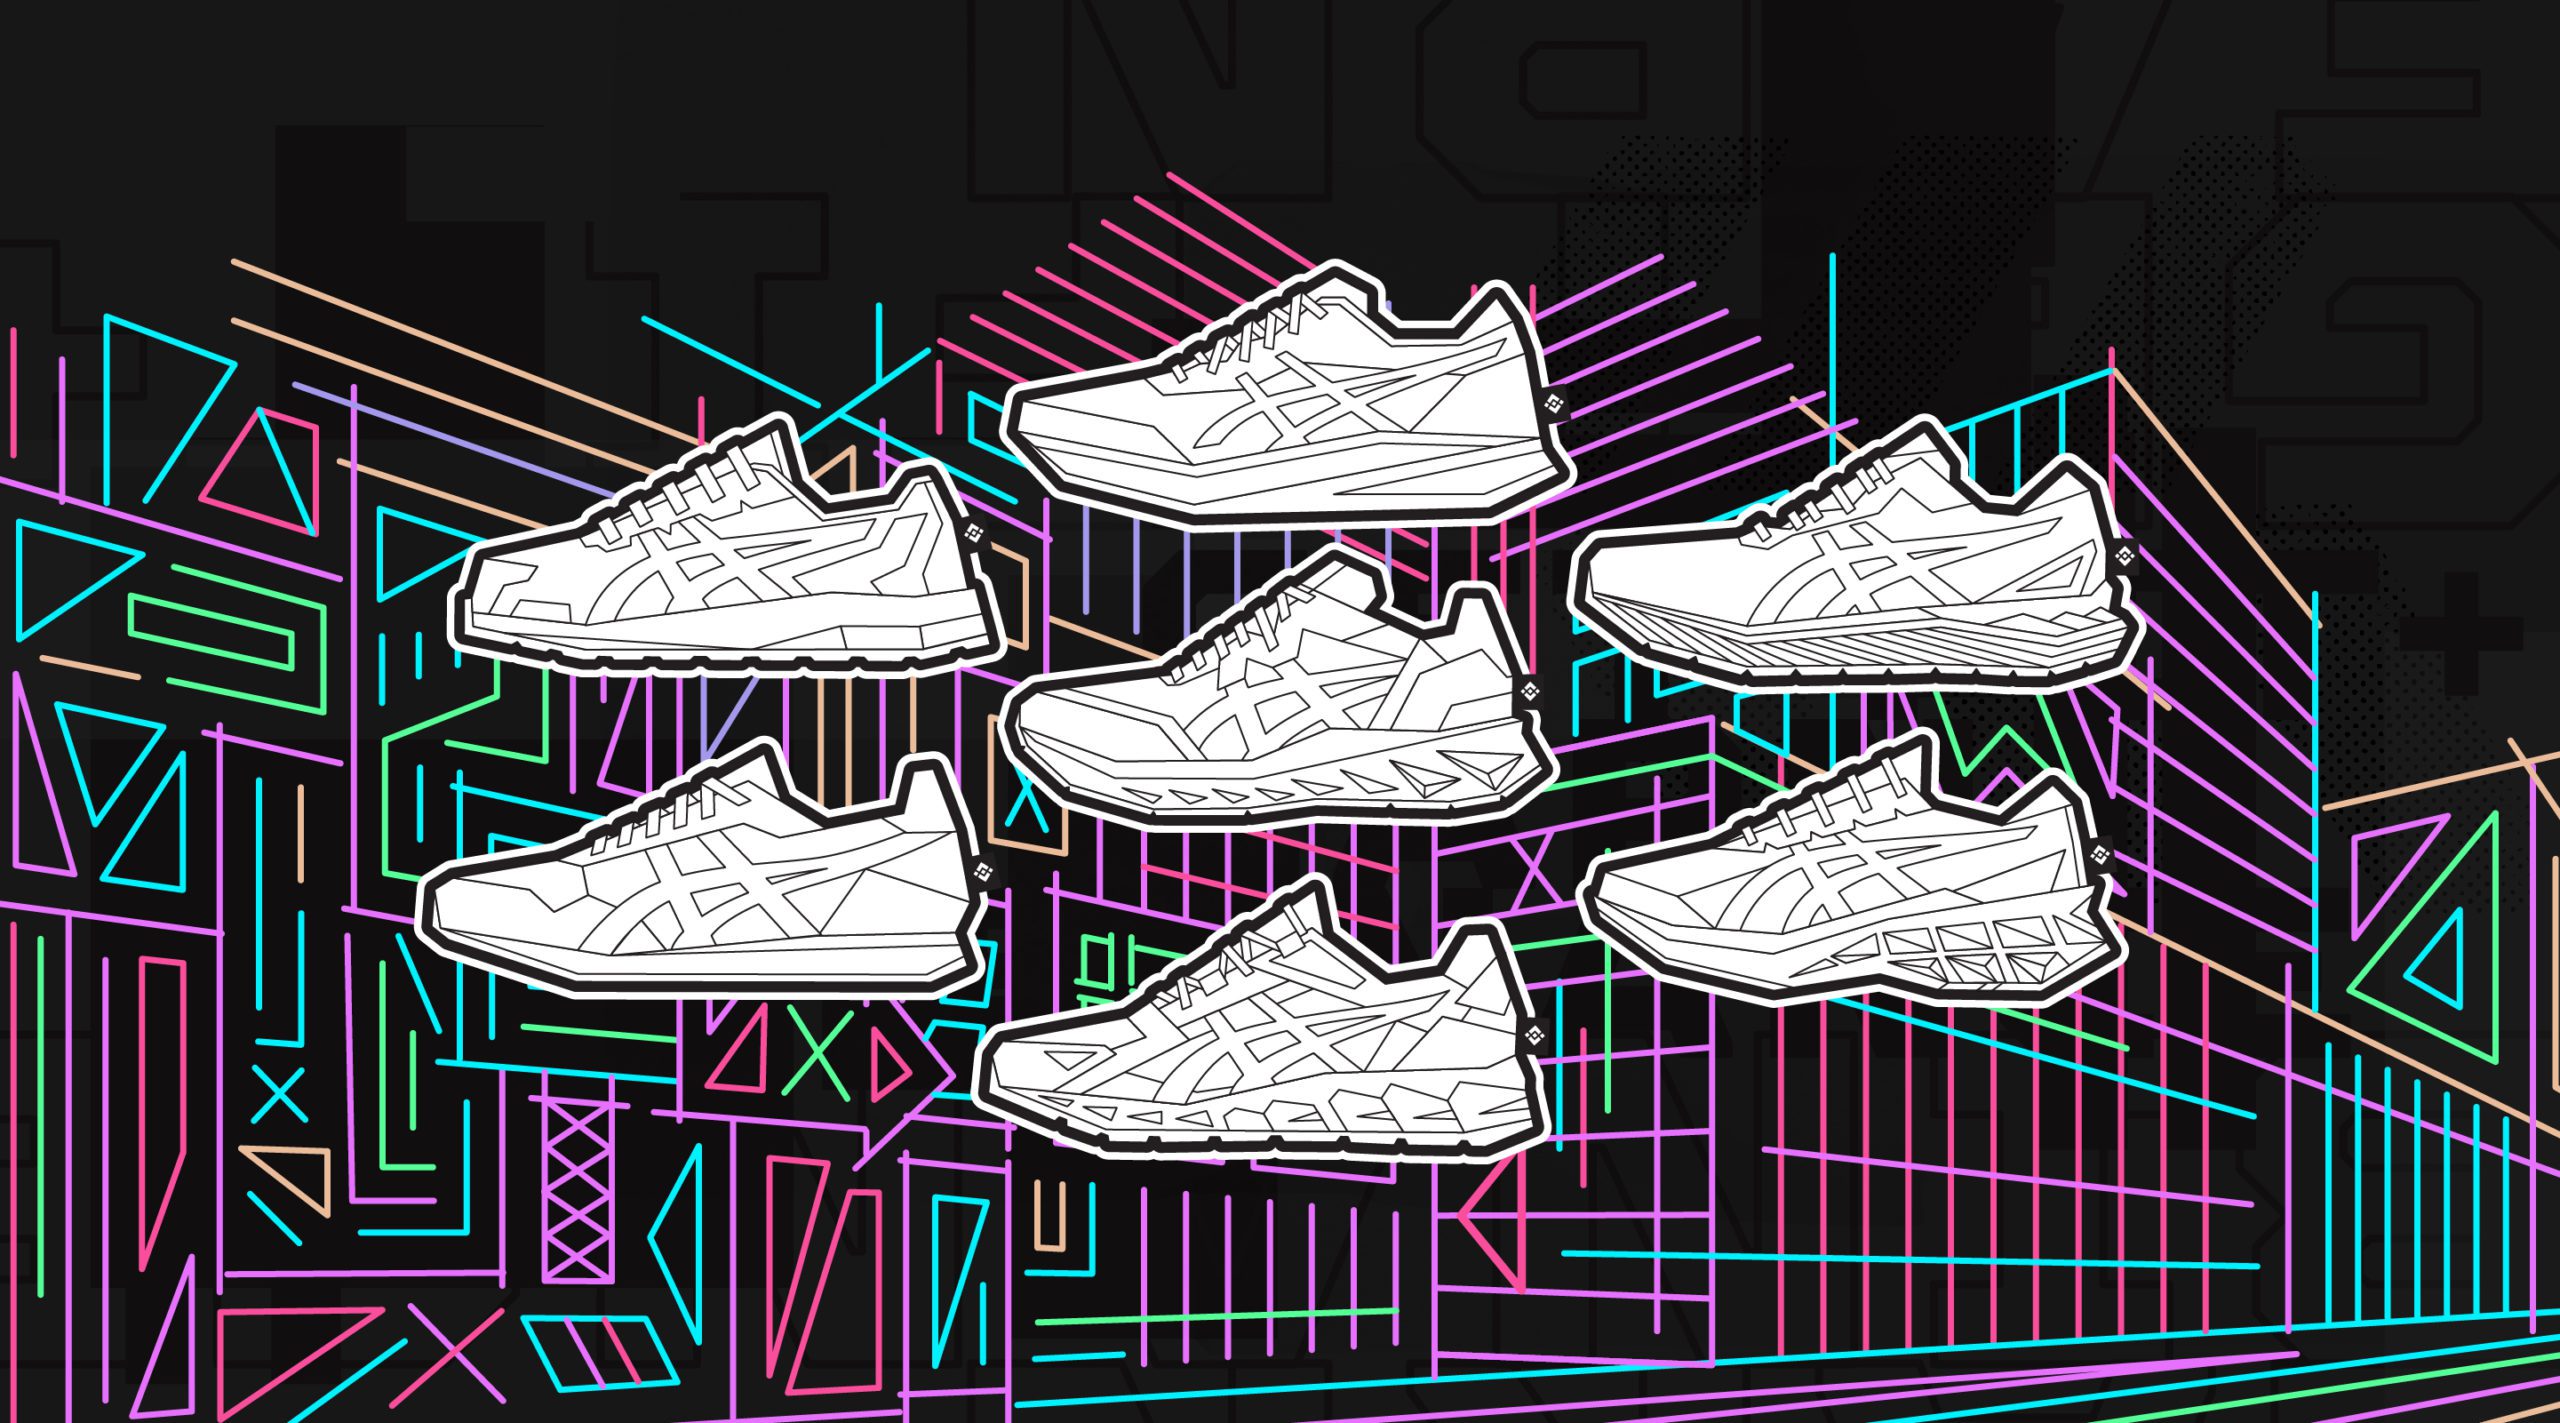 STEPN Successfully Launched its Co-Branded Limited-Edition NFT Sneakers  with ASICS on Binance NFT Marketplace